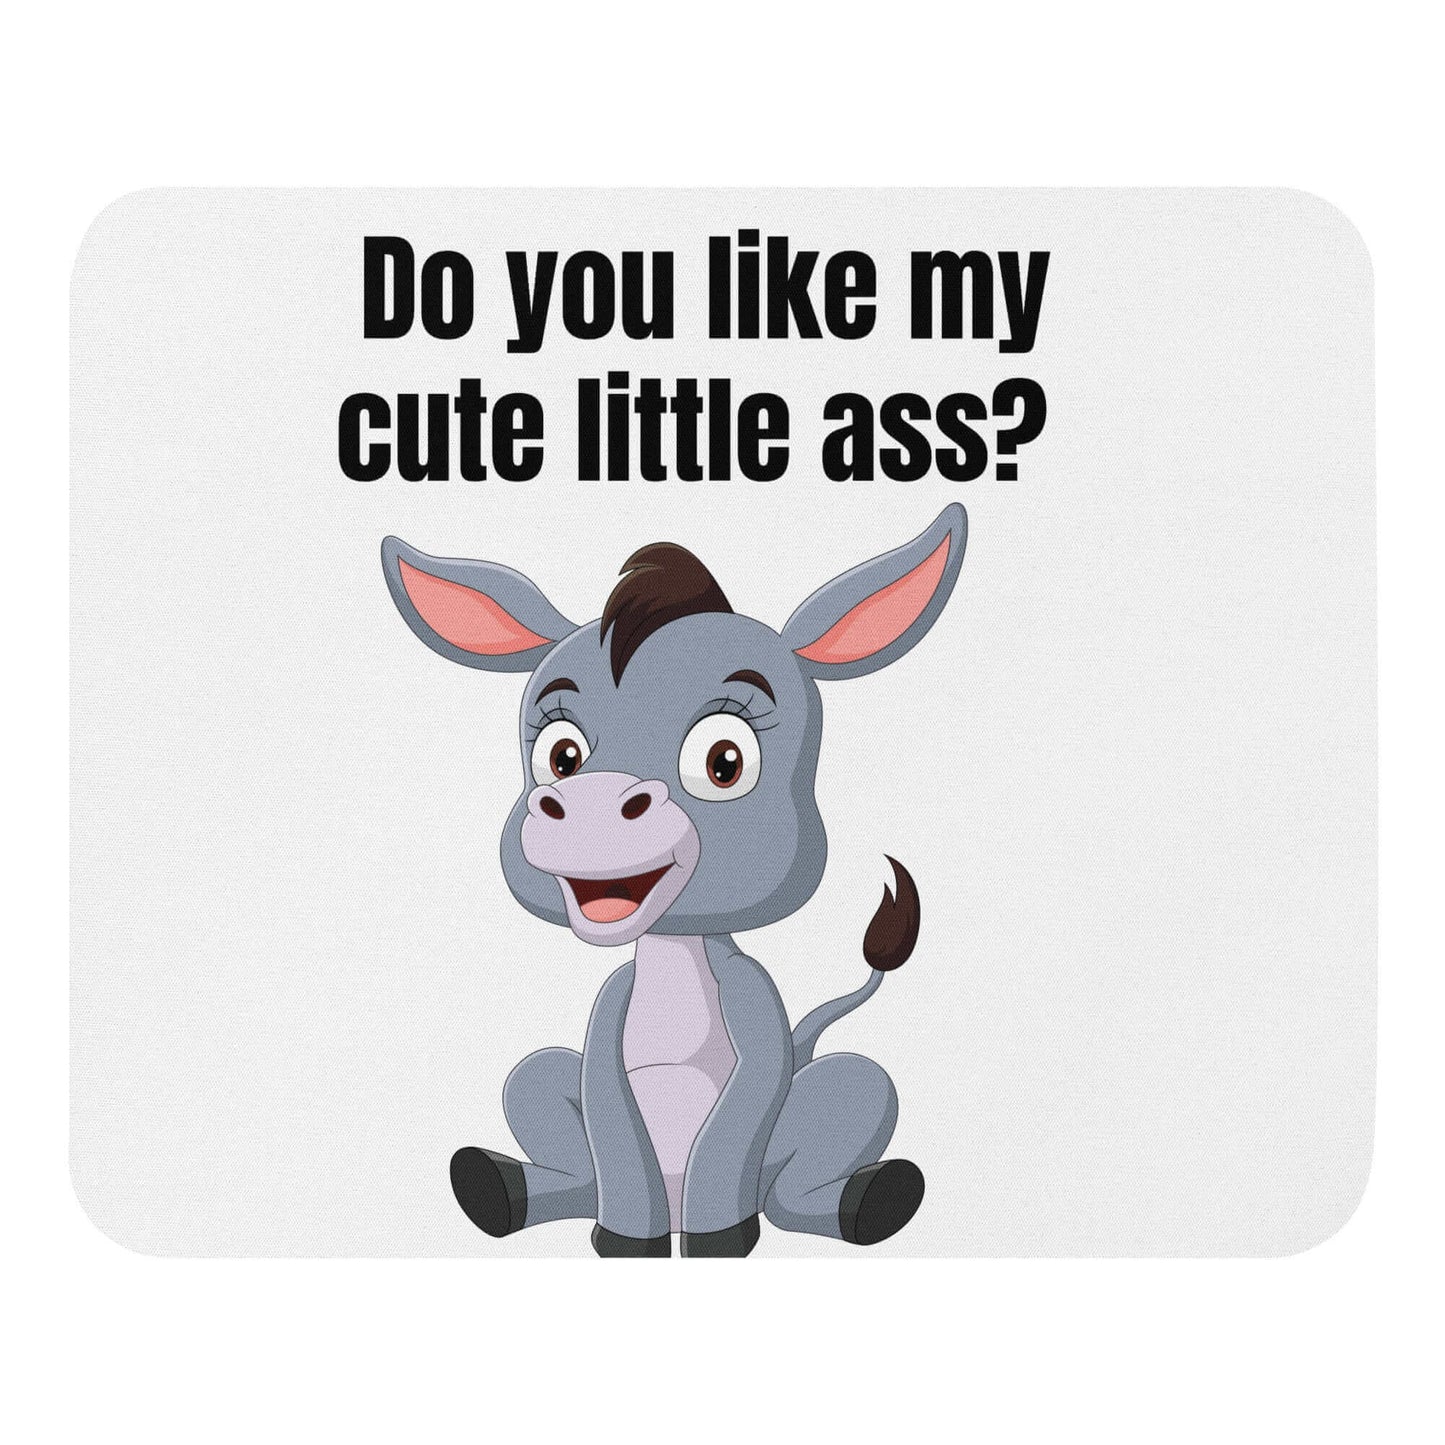 Do you like my cute little ass? - Mouse pad - Horrible Designs